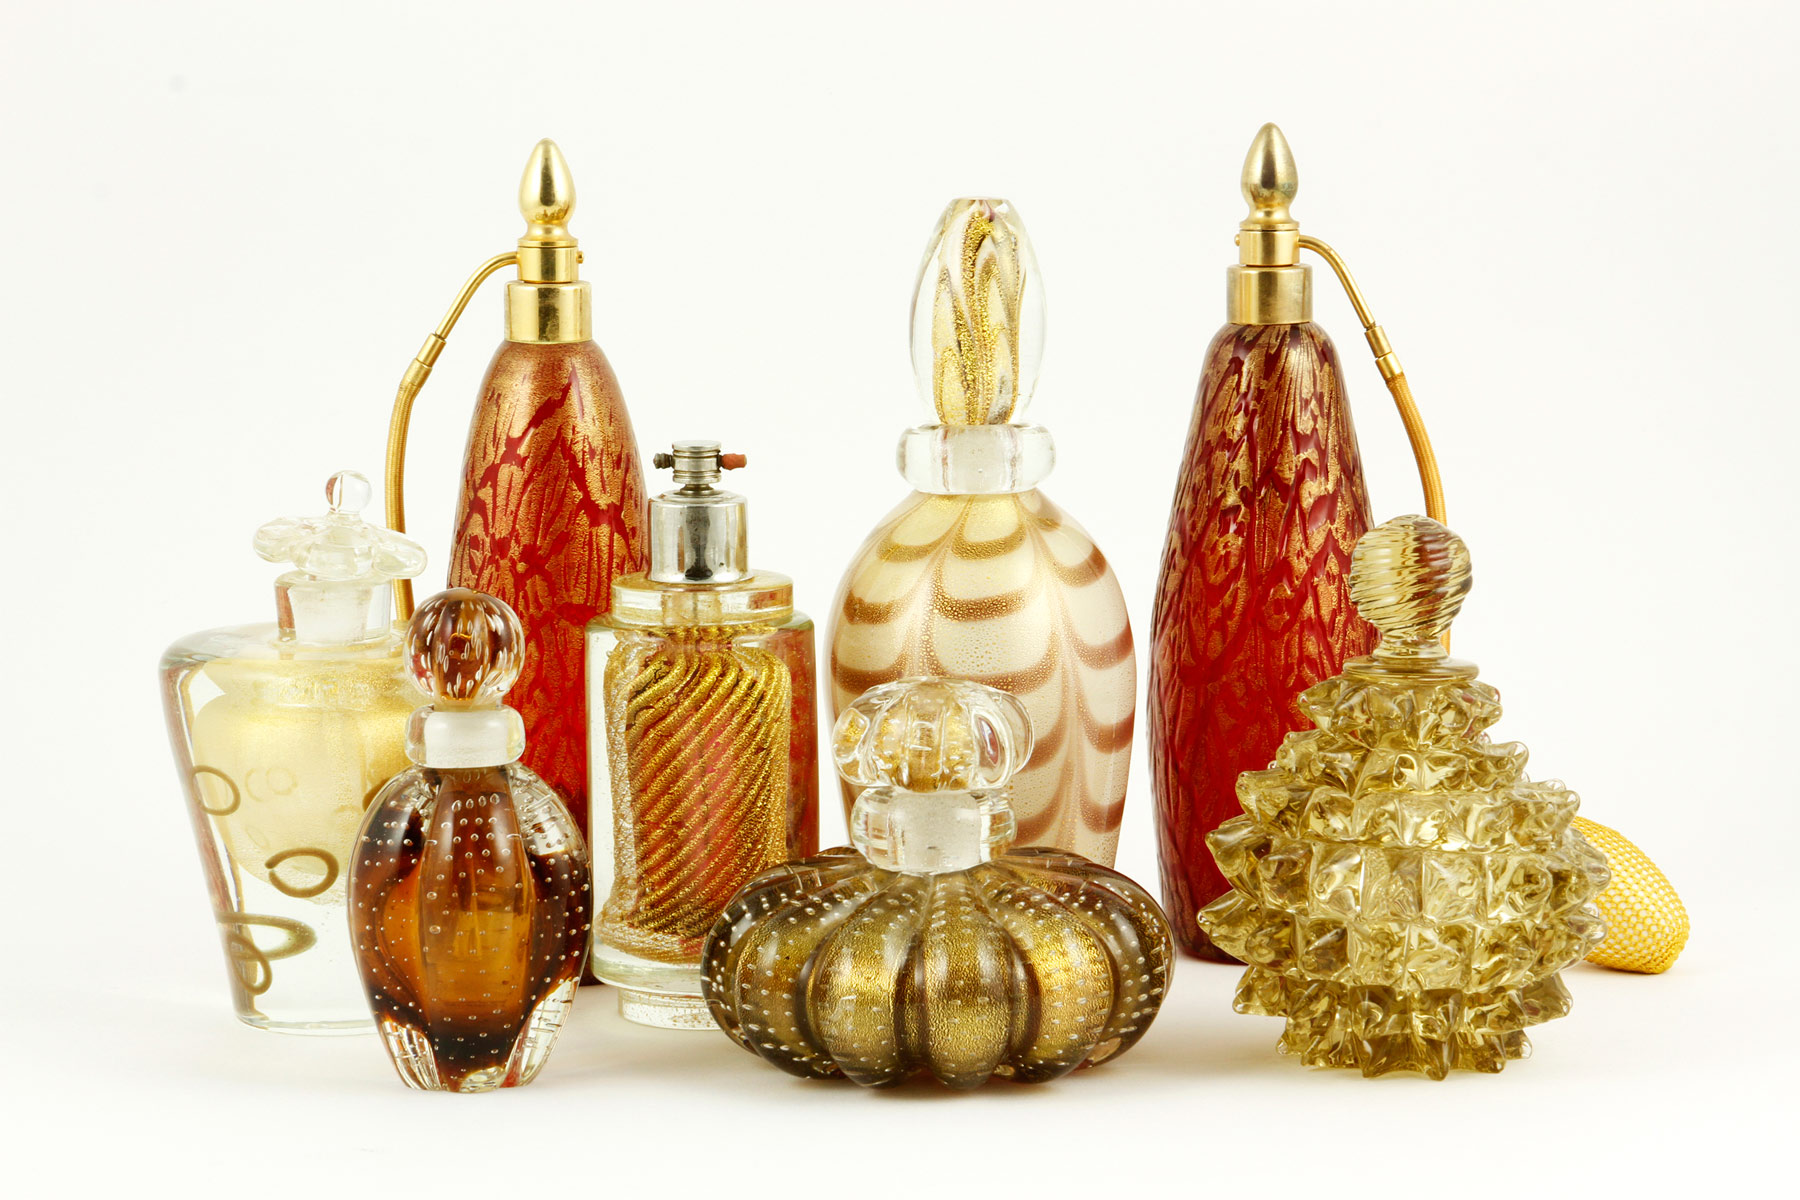 Selection of Murano Glass Bottles from the Robert Loy Collection